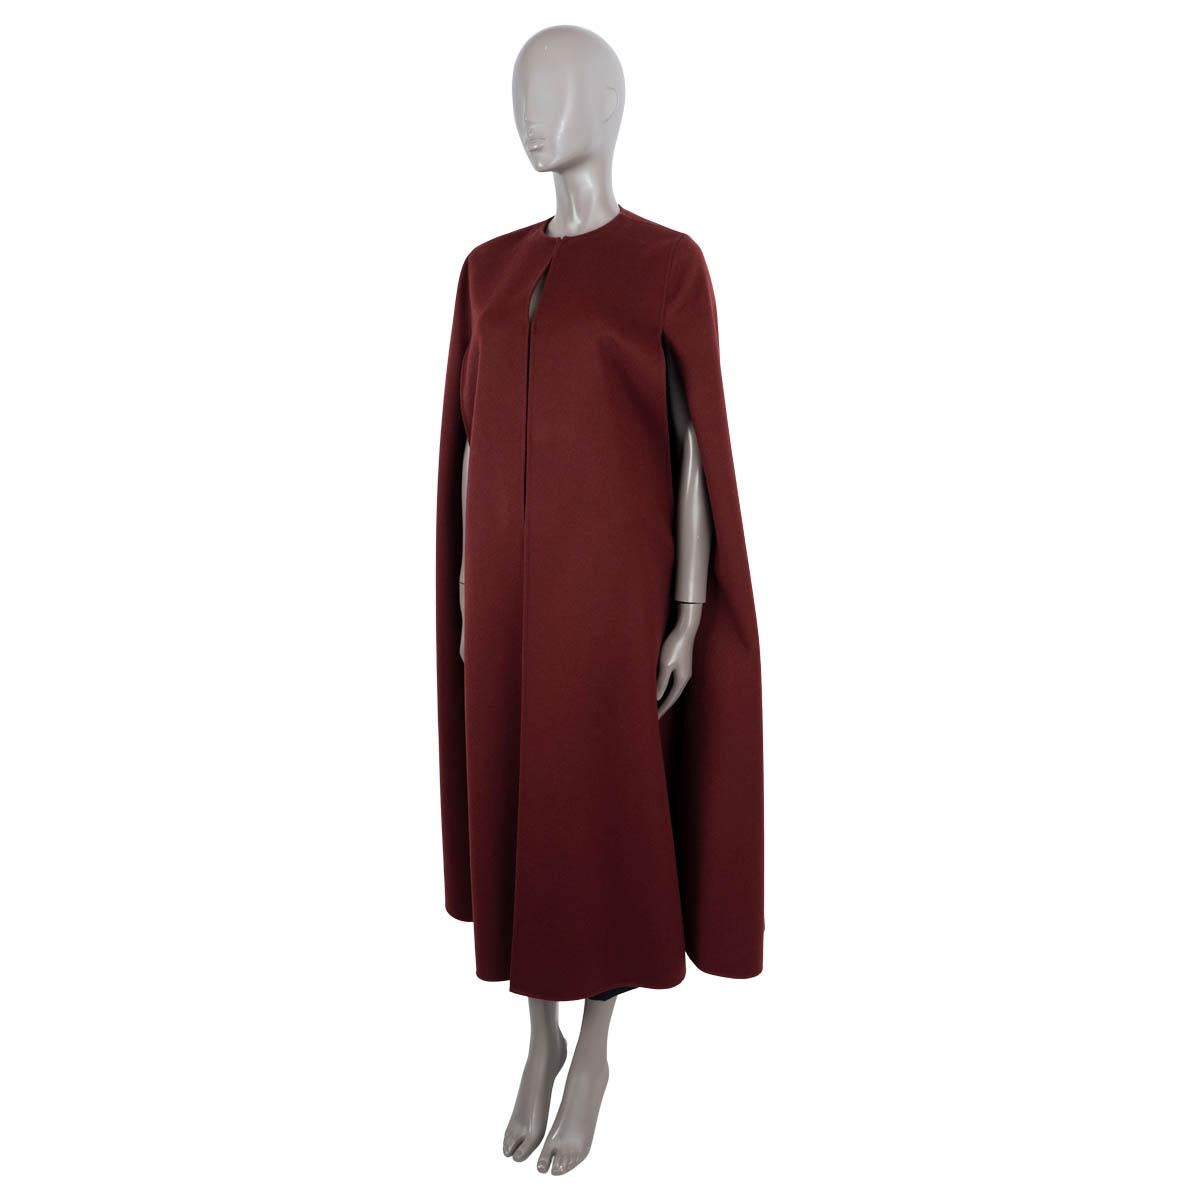 100% authentic Valentino maxi cape in burgundy wool (95%) and cashmere (5%). Features a sleek, collarless silhouette. Unlined. Has been worn and is in excellent condition.

2020 Resort

Measurements
Model	TB3CG1N515E
Tag Size	38
Size	XS
Shoulder